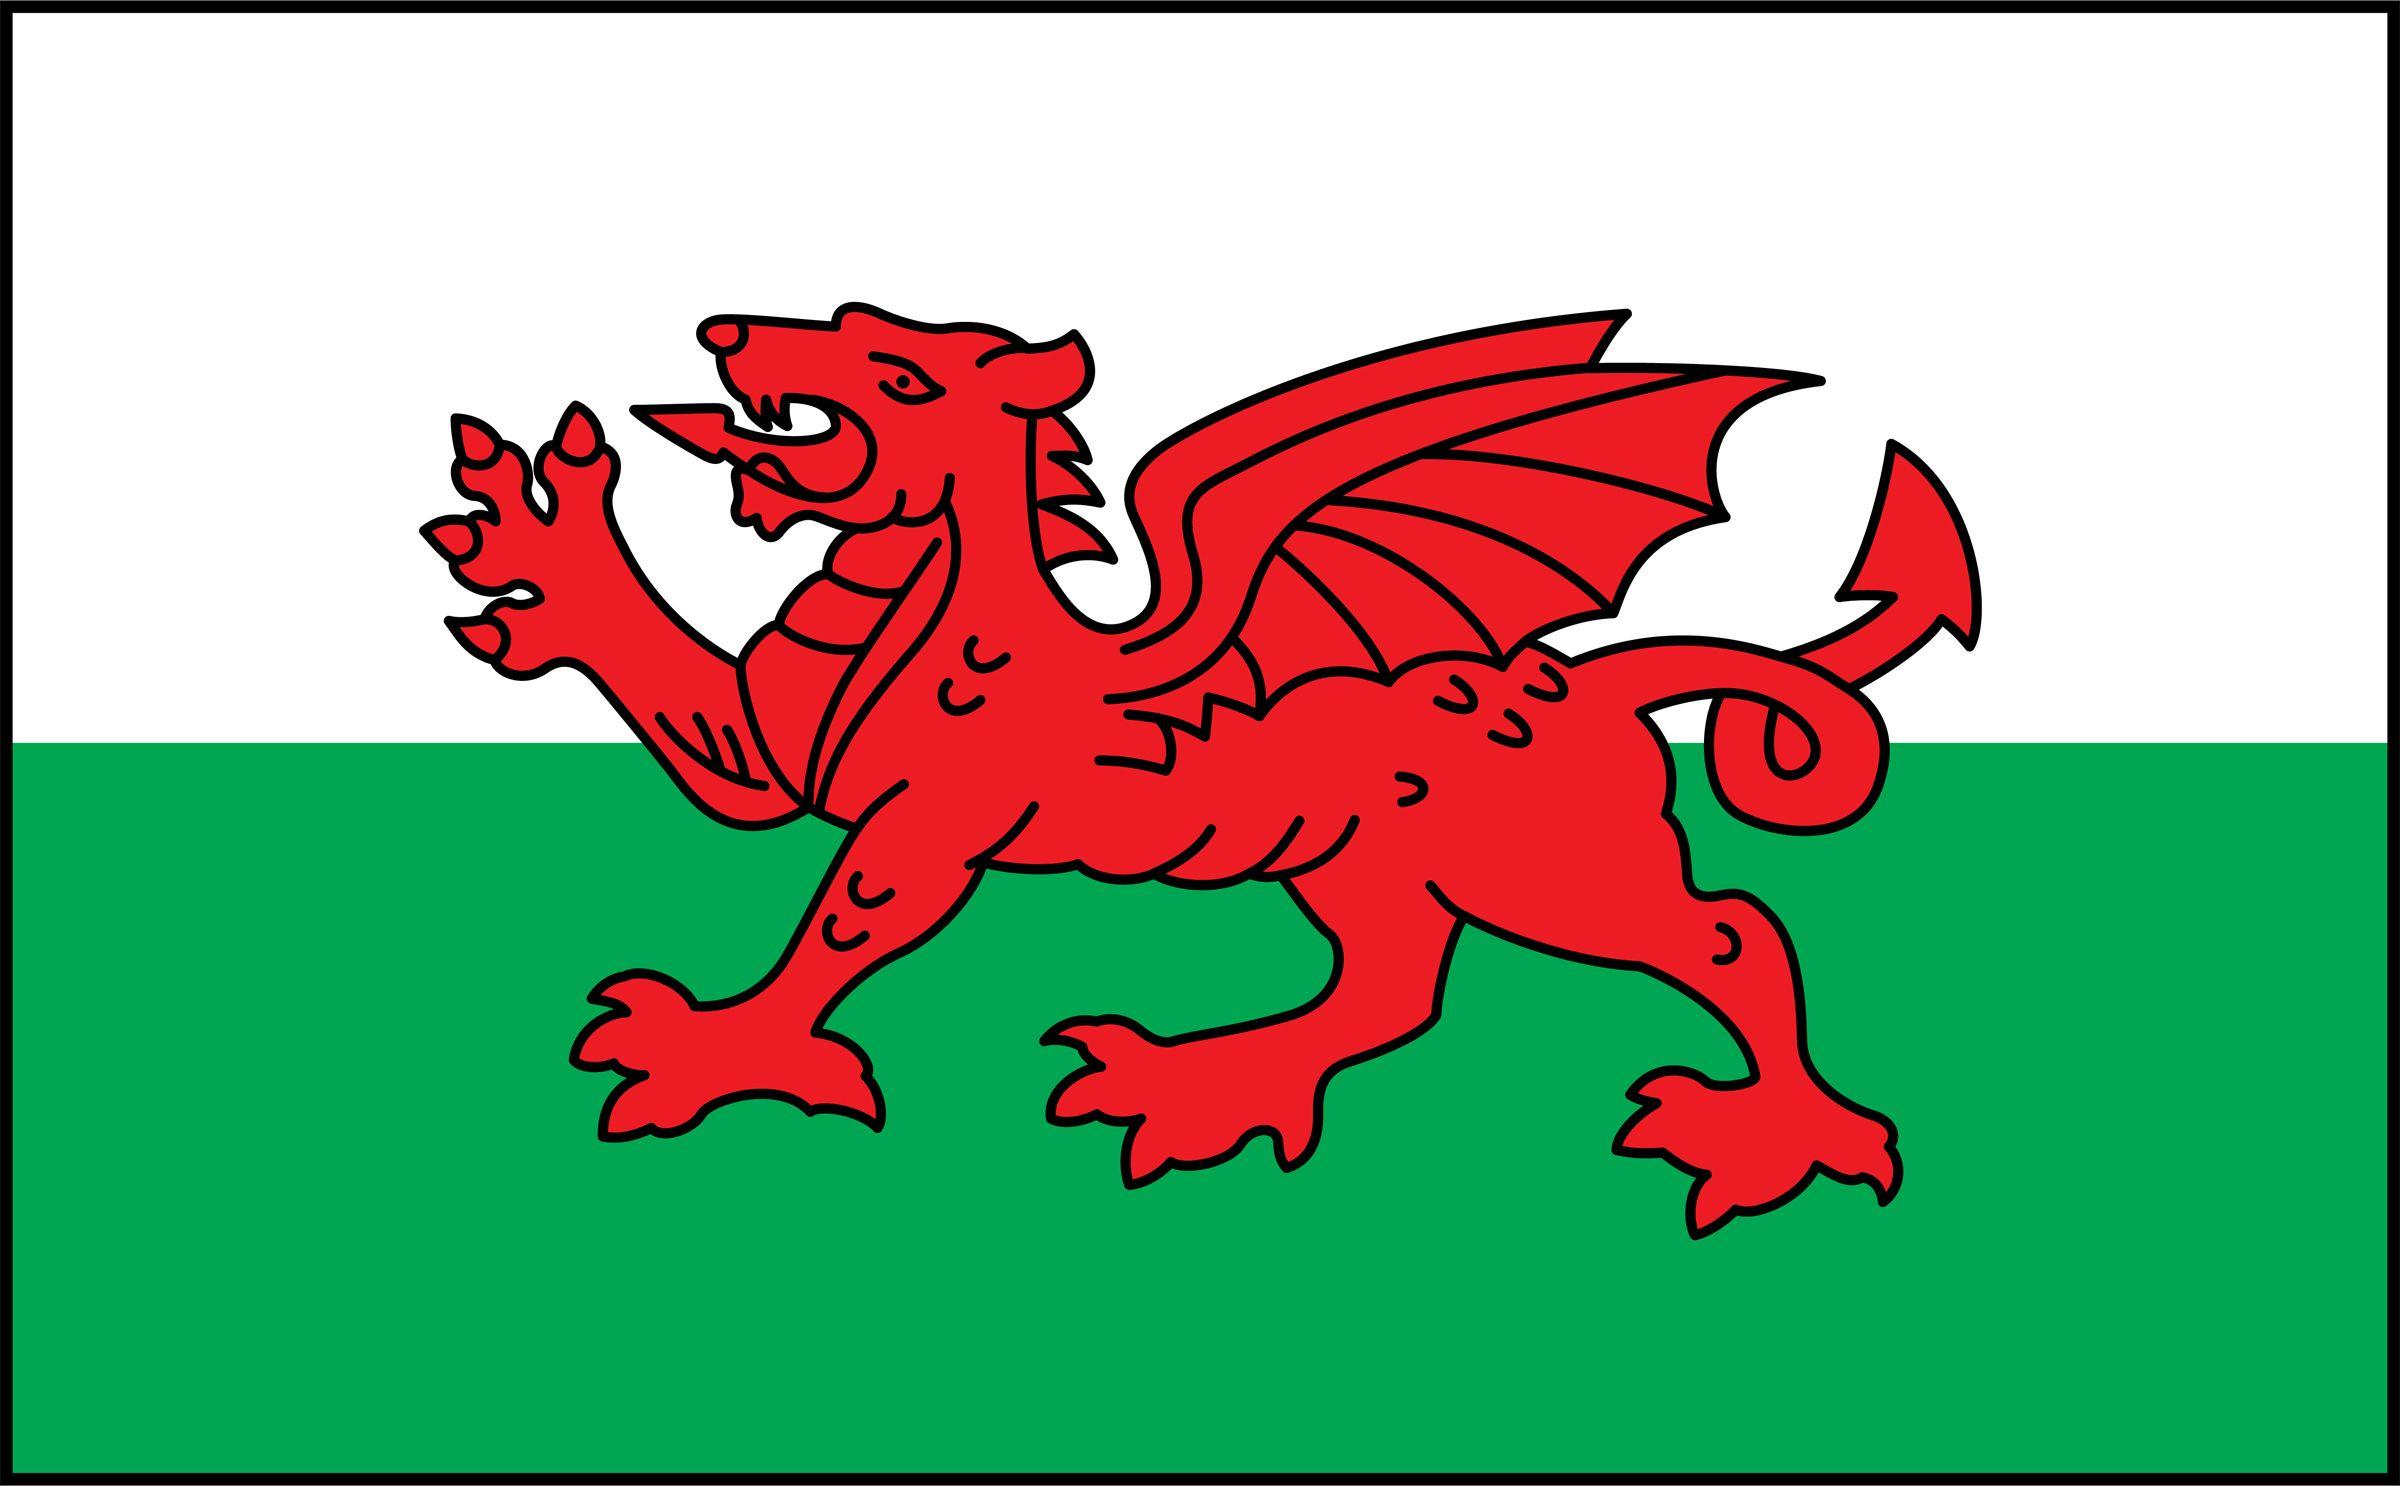 Wales. Wales flag, Flag, Mythical